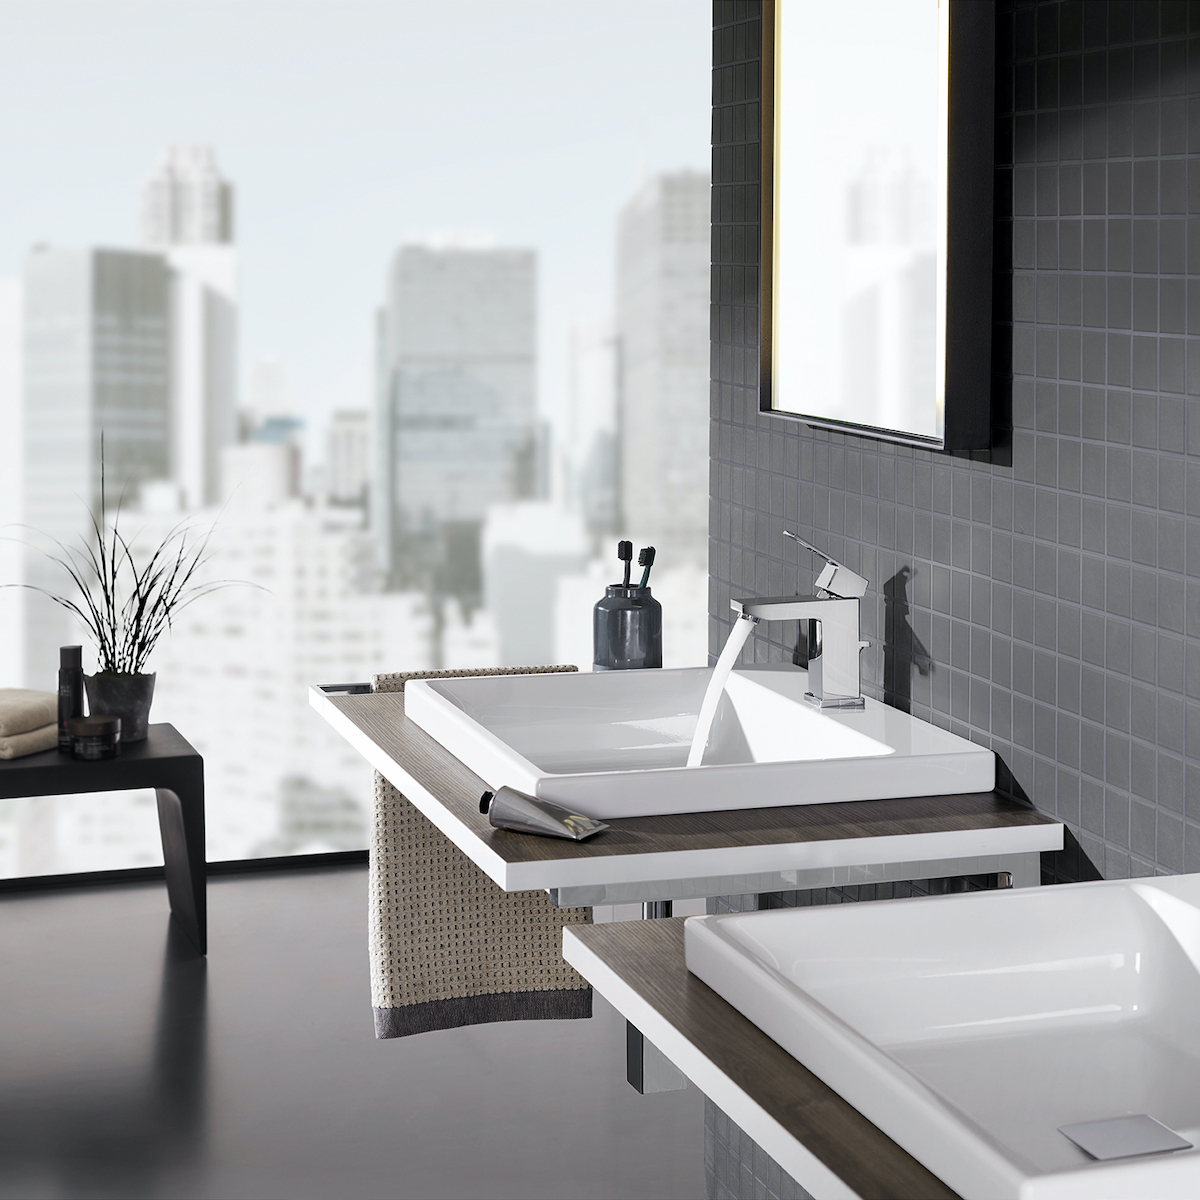 Grohe Canada Grohe Canada Twitter